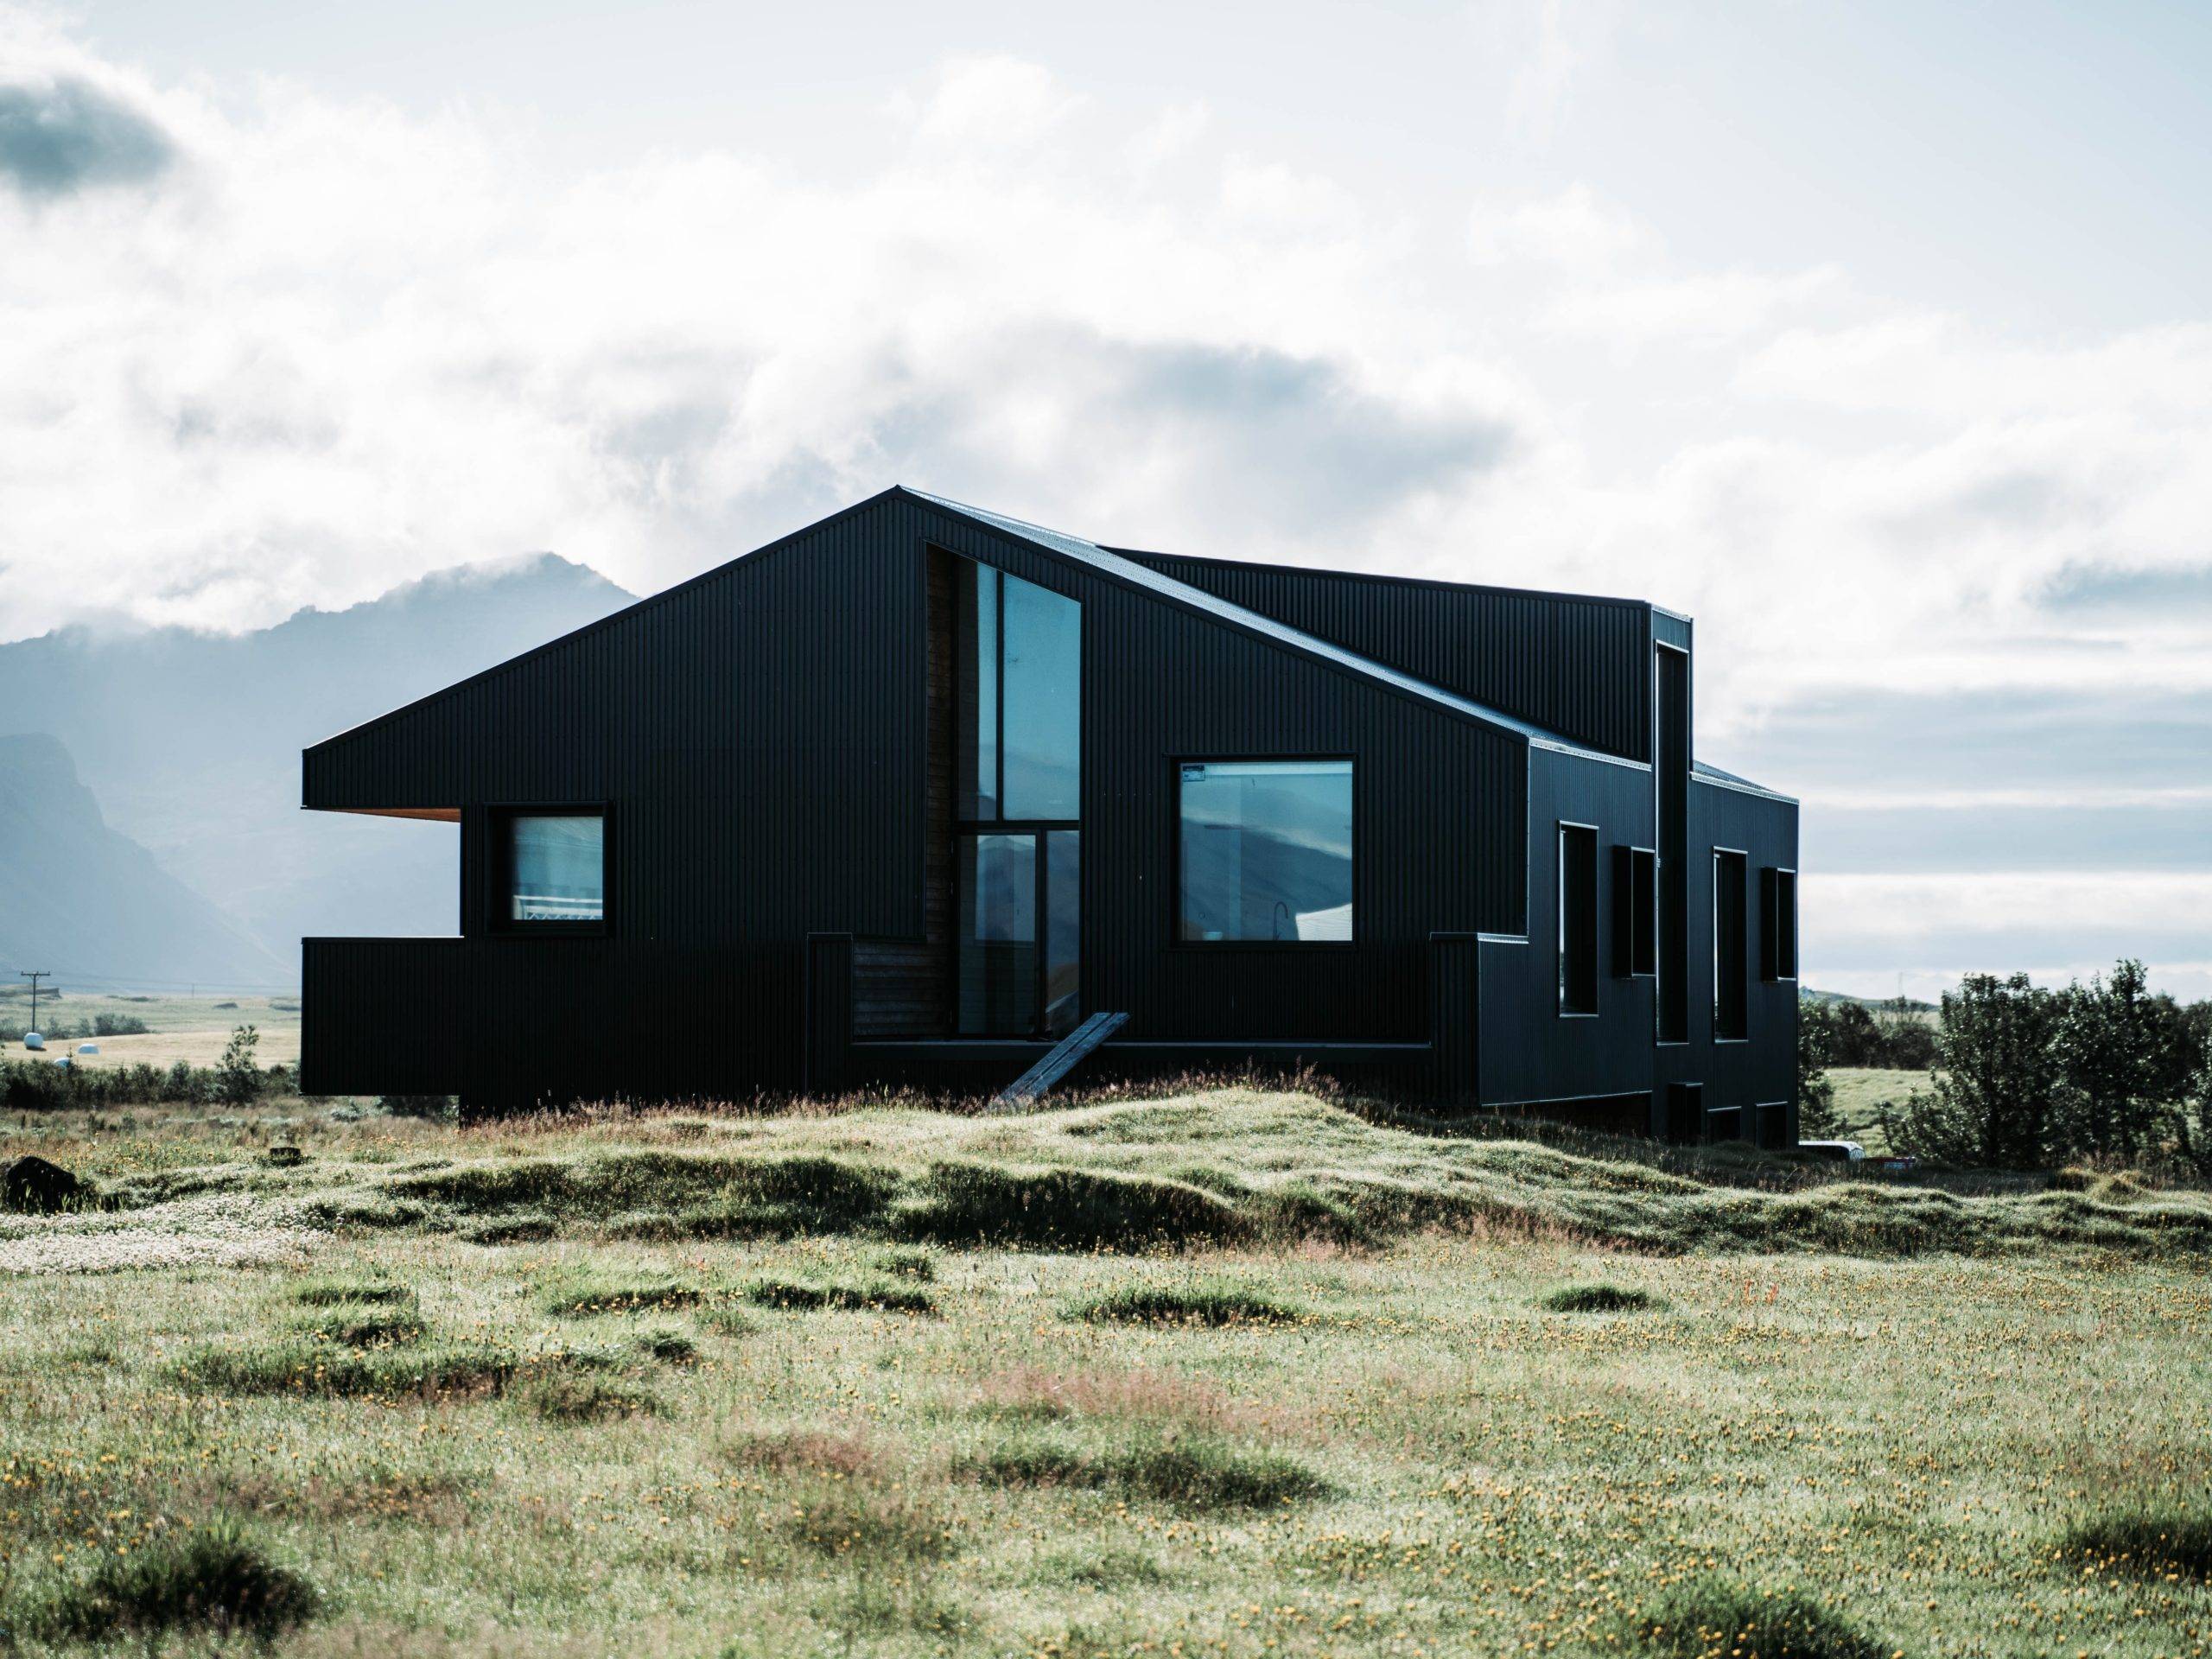 Black house in the middle of bare land